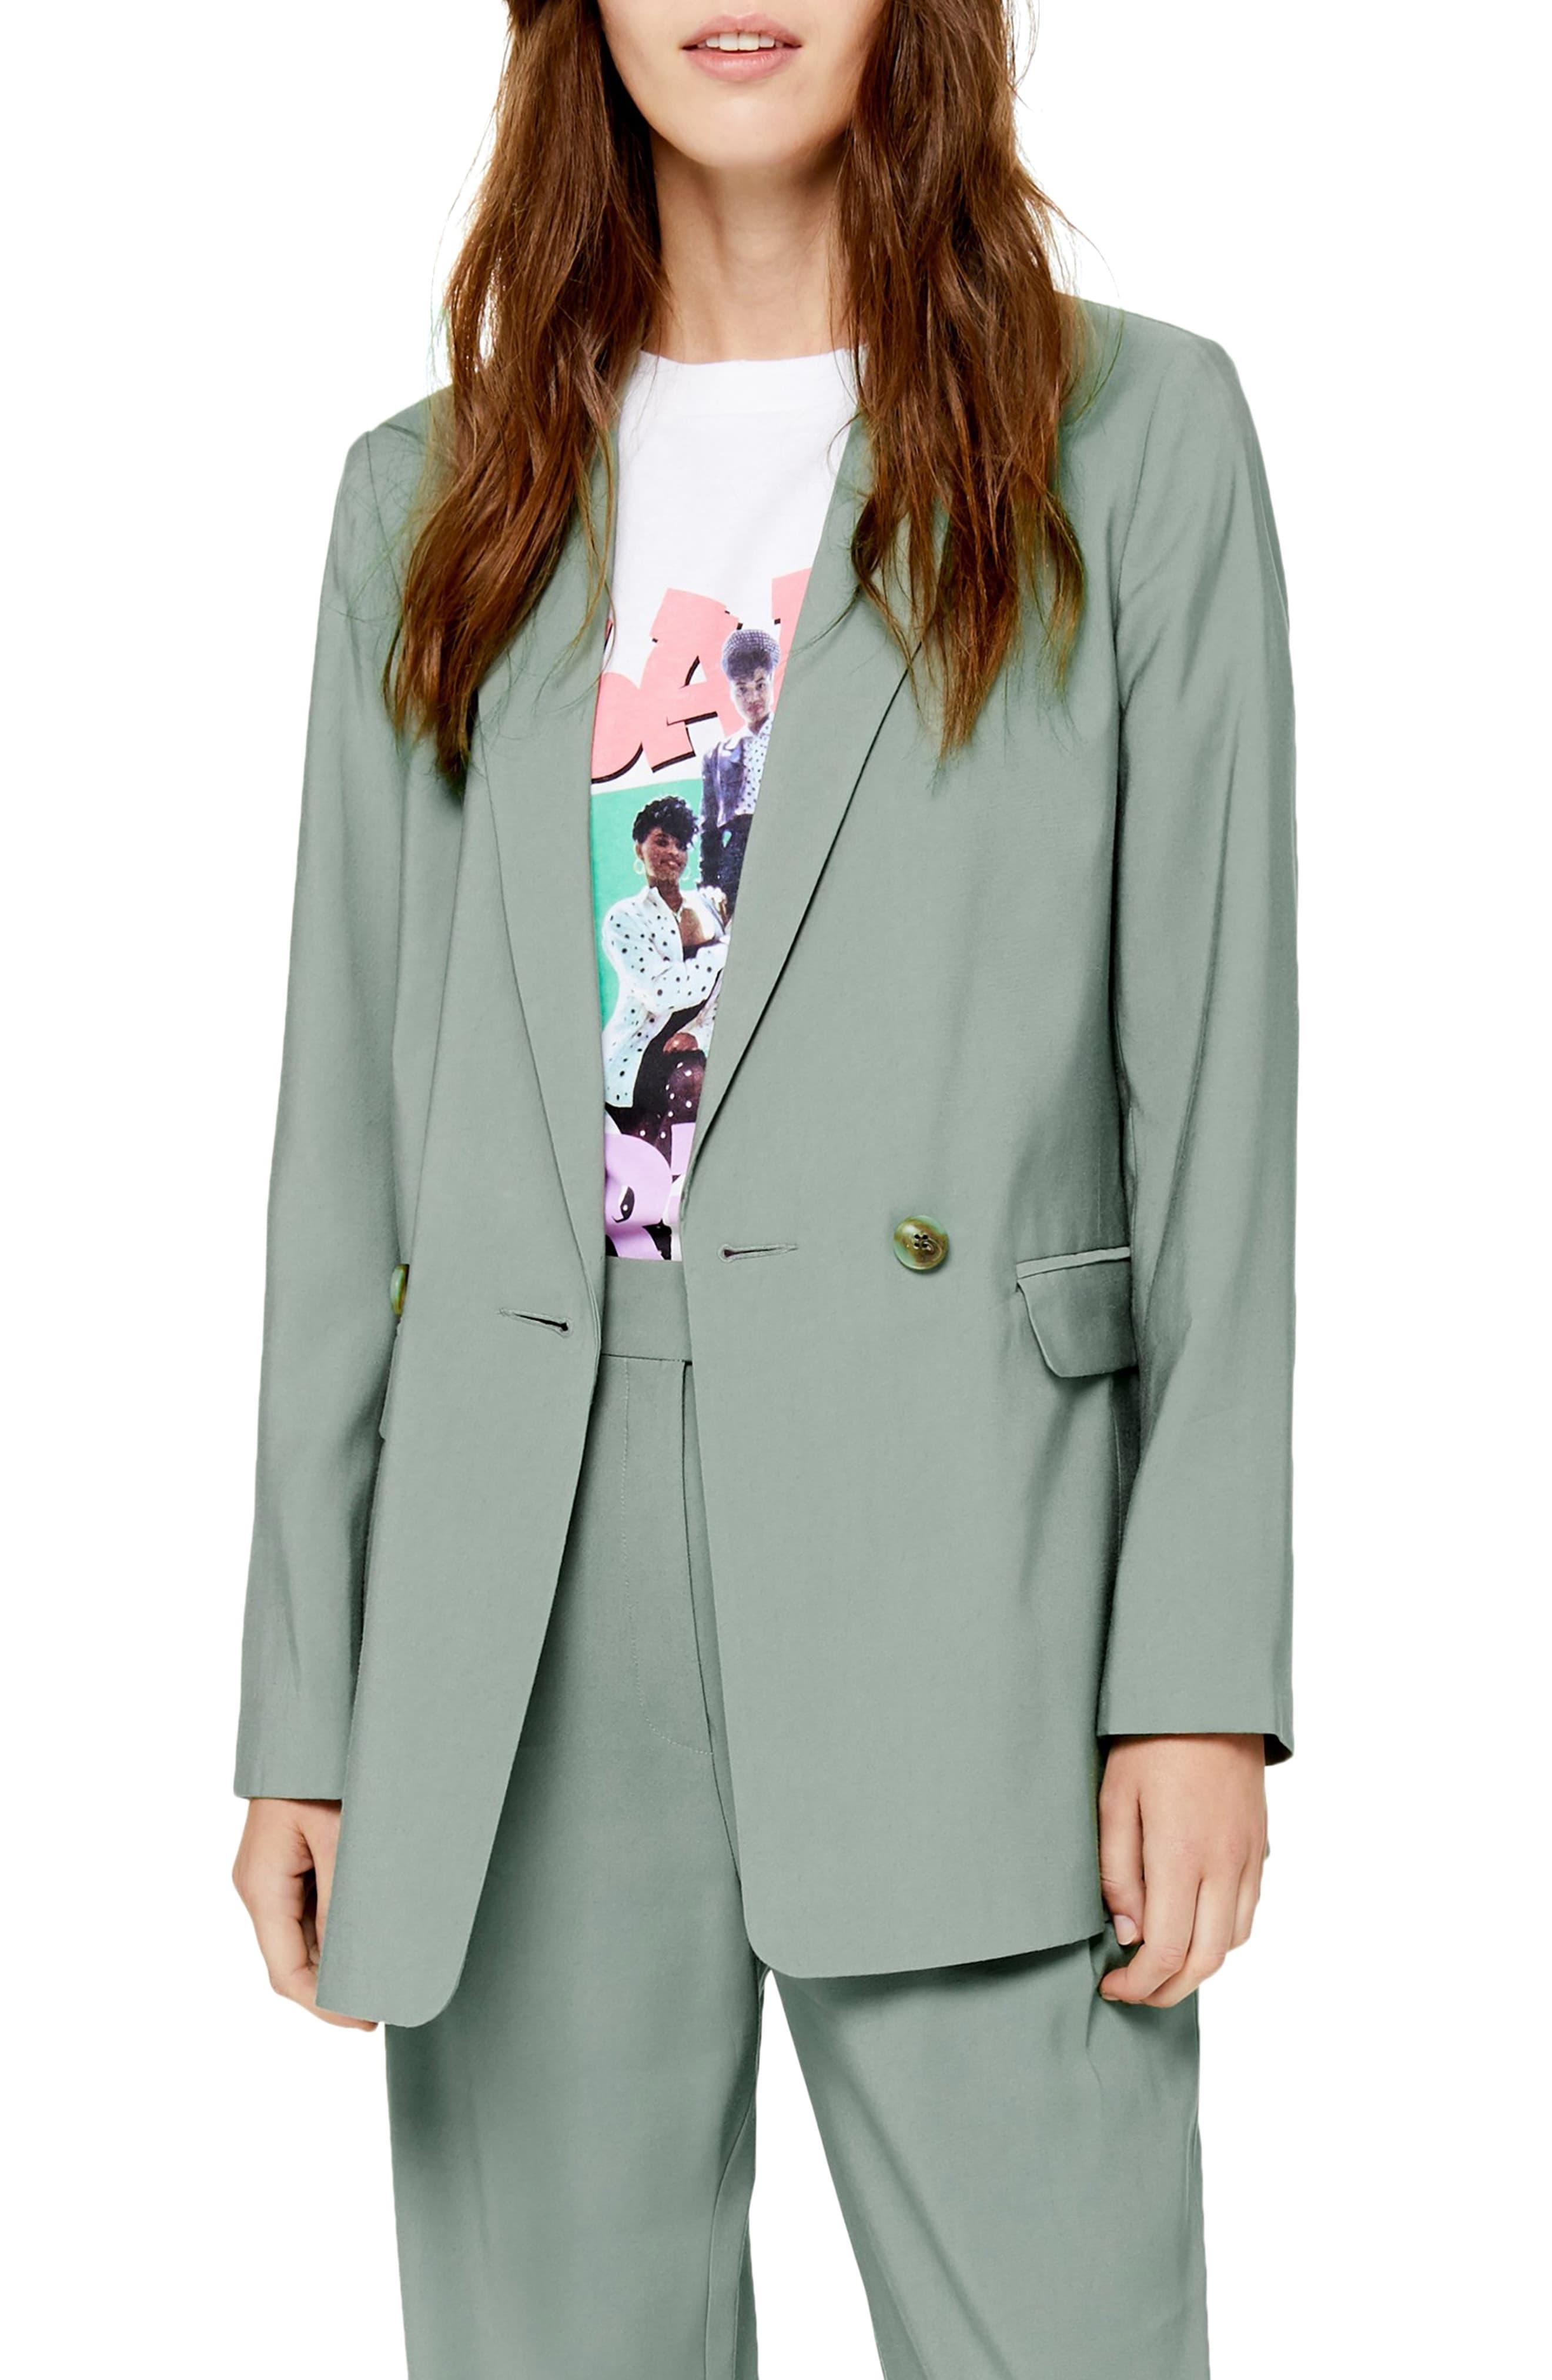 TOPSHOP Millie Double Breasted Blazer in Olive (Green) - Save 63% - Lyst